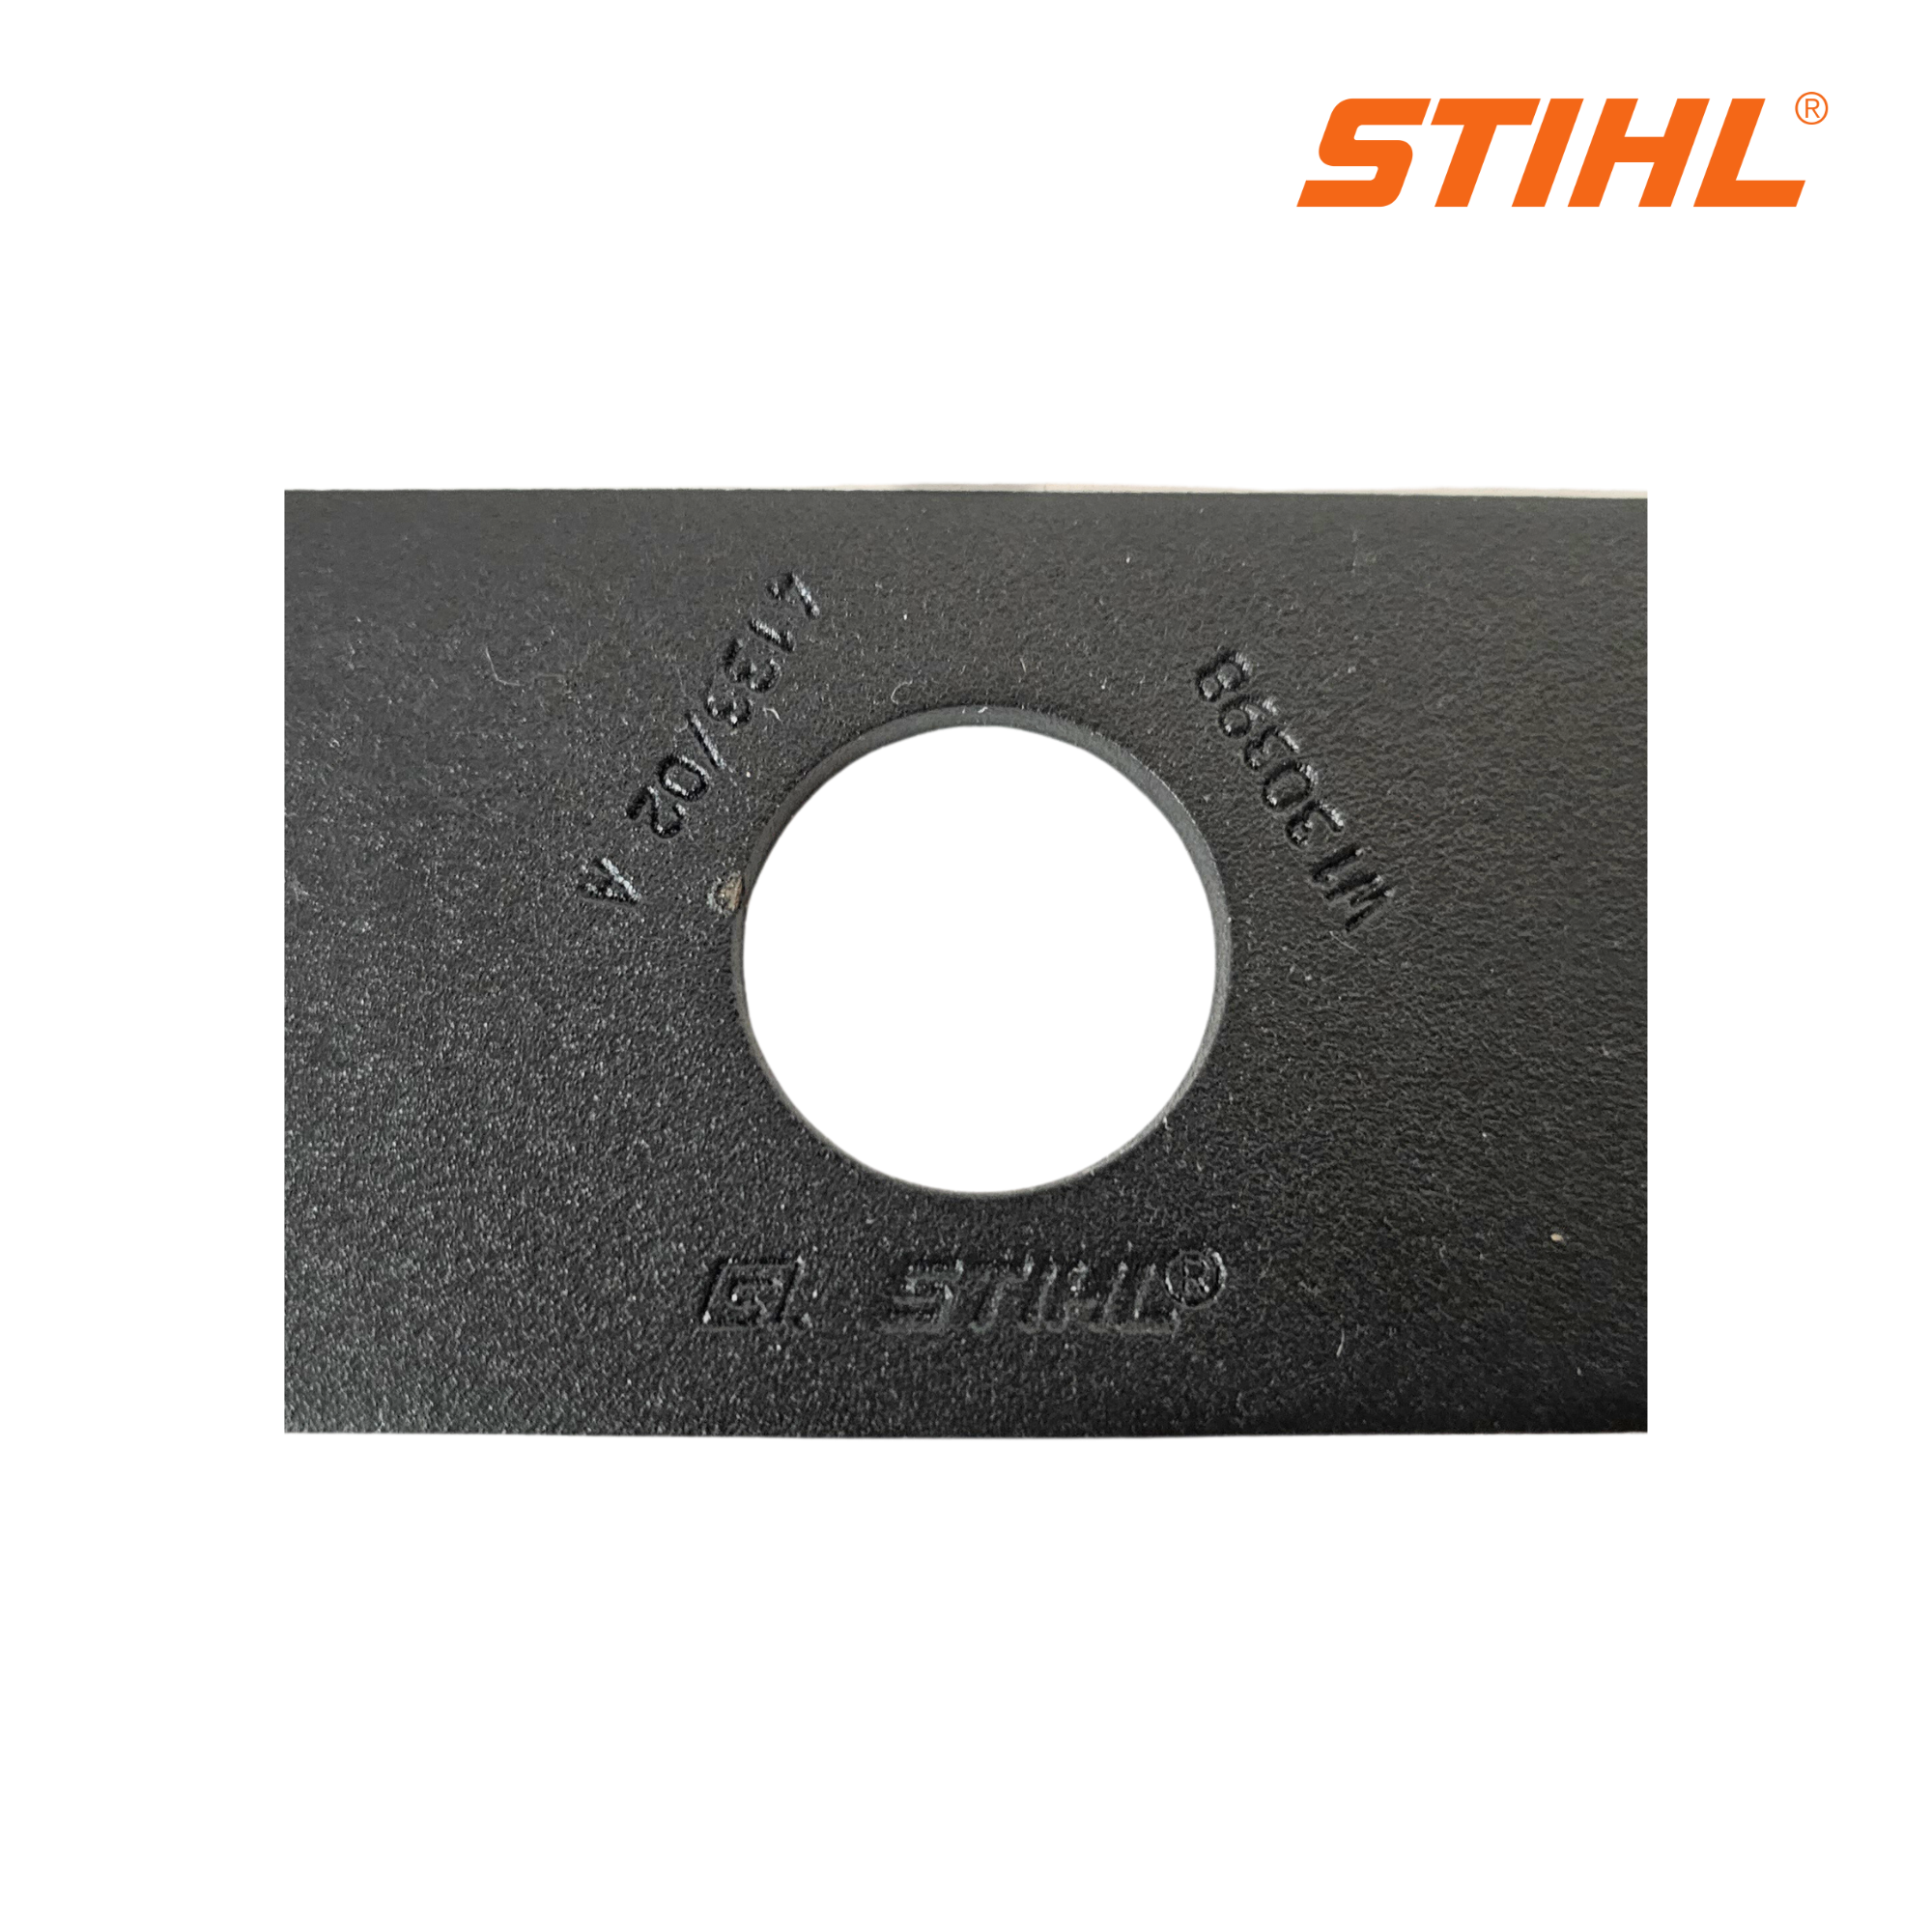 Stihl Edger Blade, 8in.L | 3.8mm Thick | 4133 713 4102